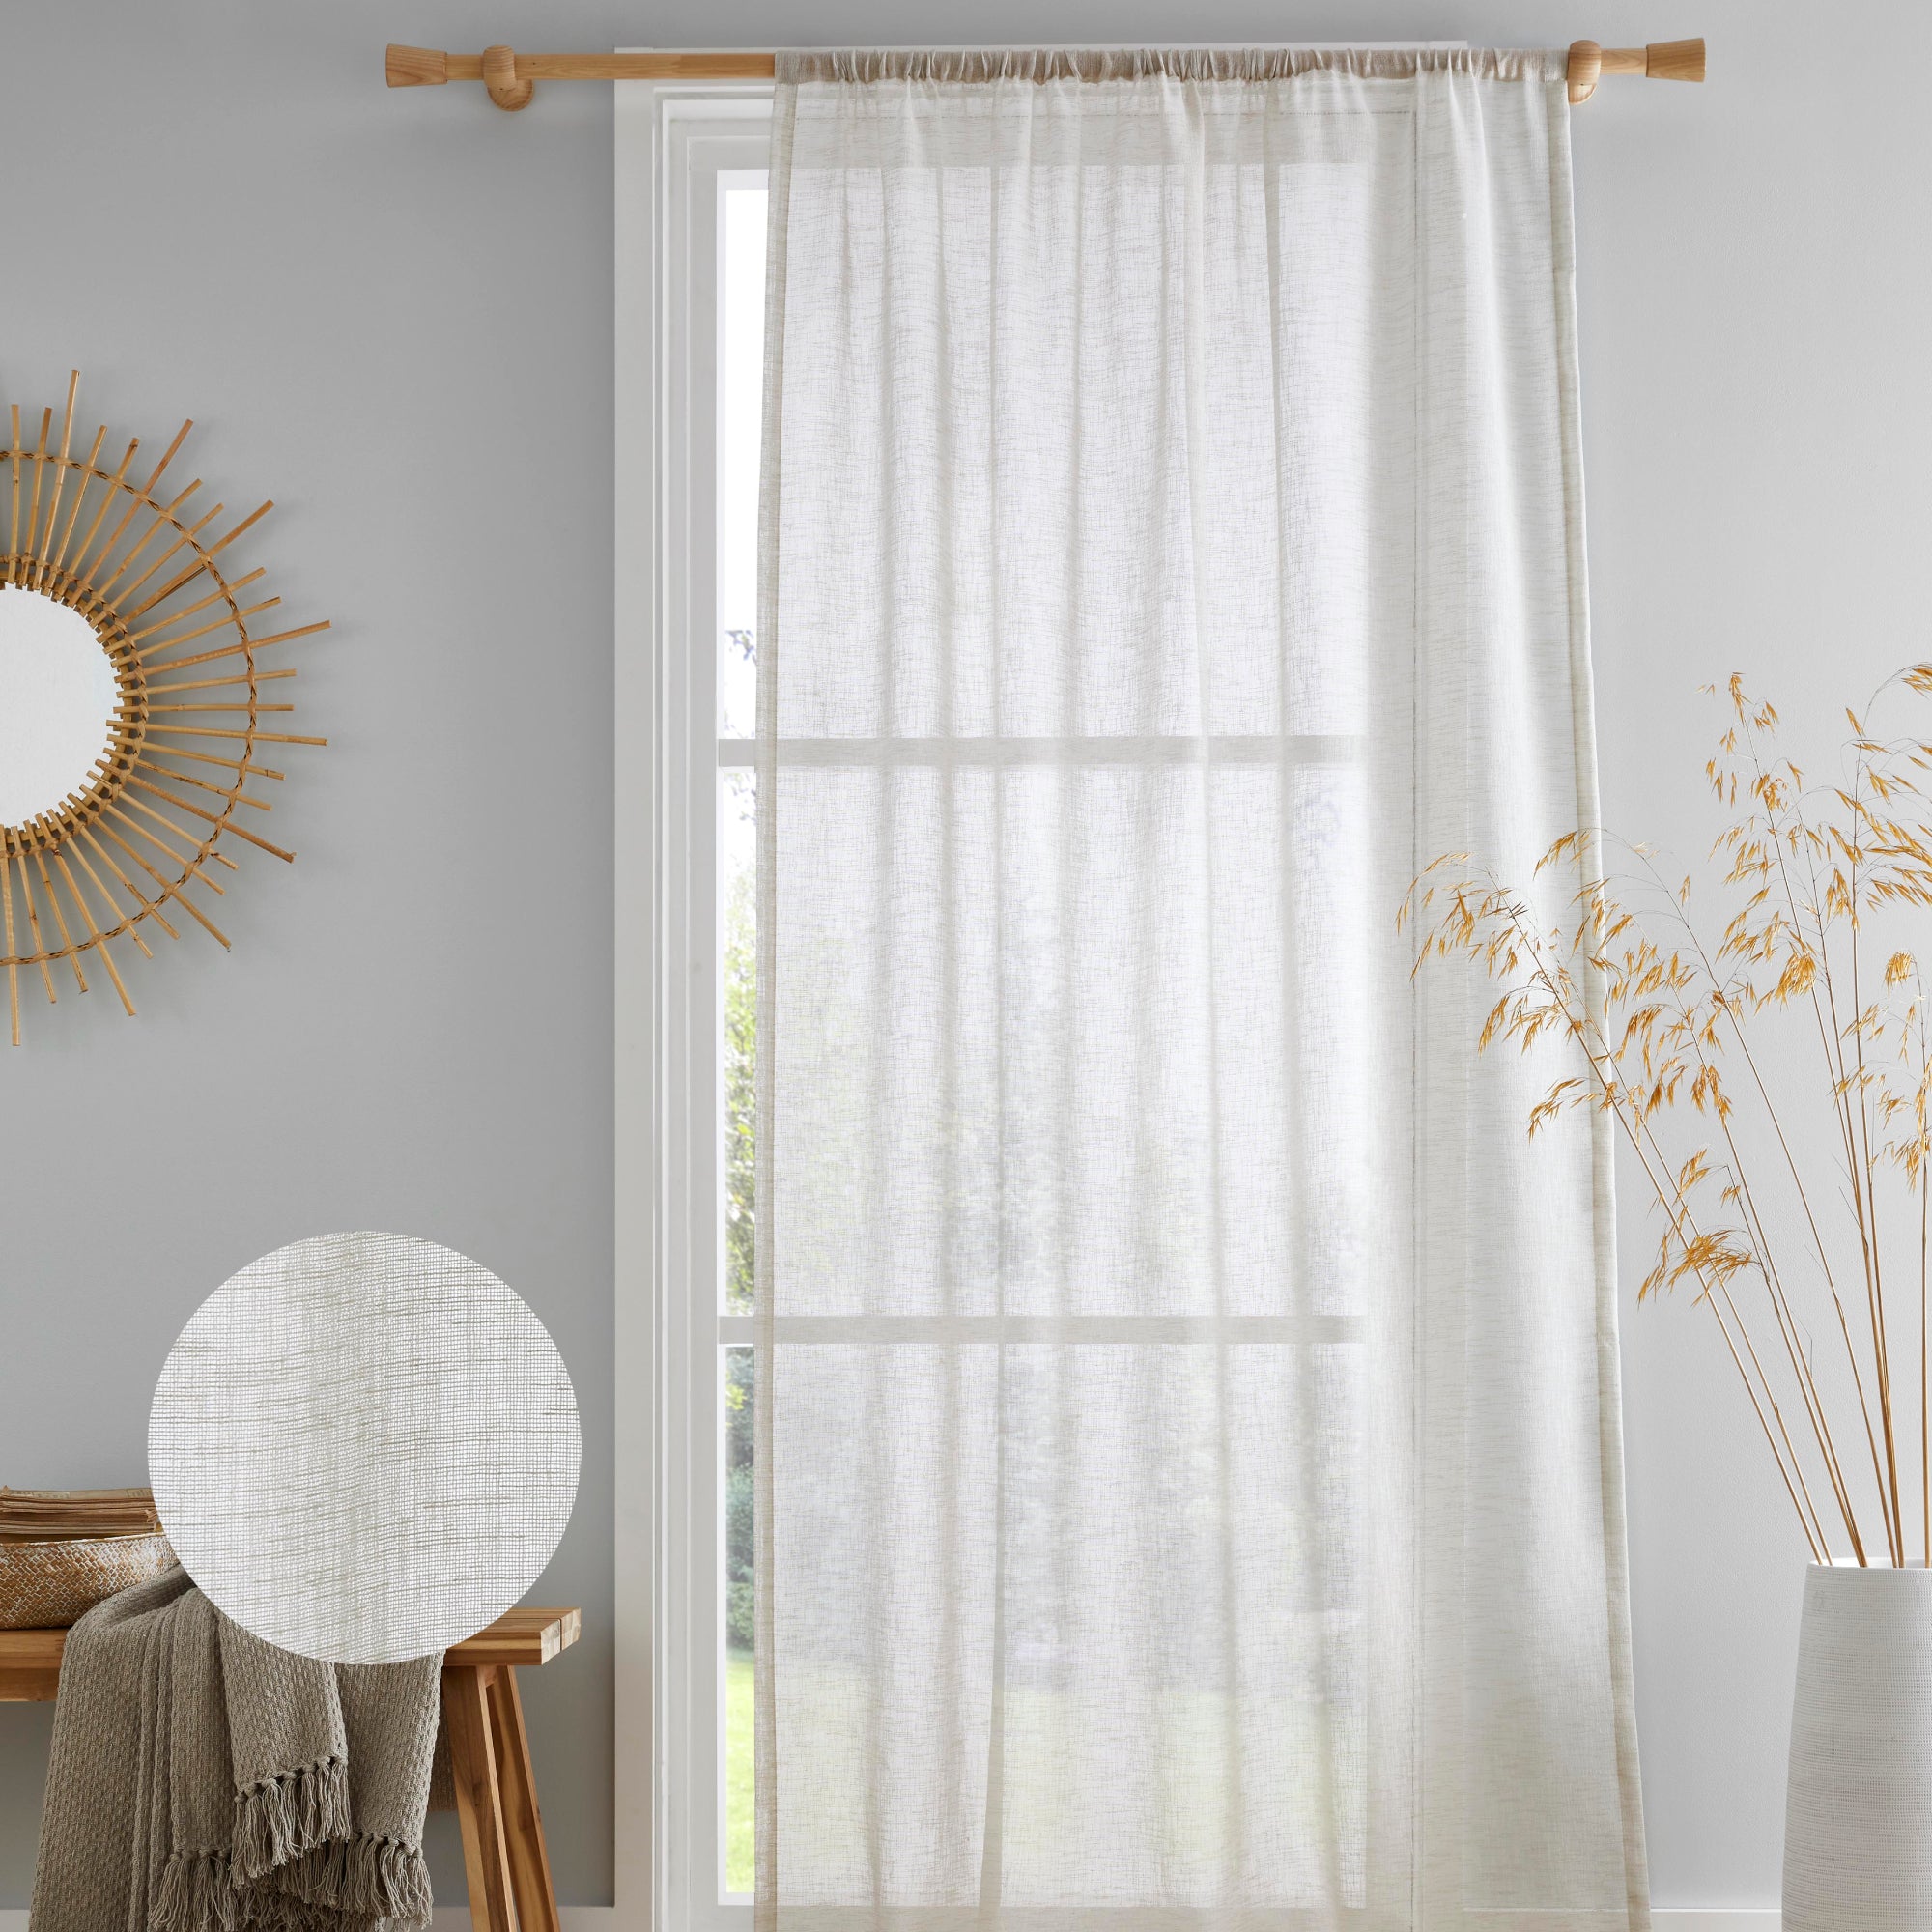 Voile Panel Kayla by Drift Home in Natural